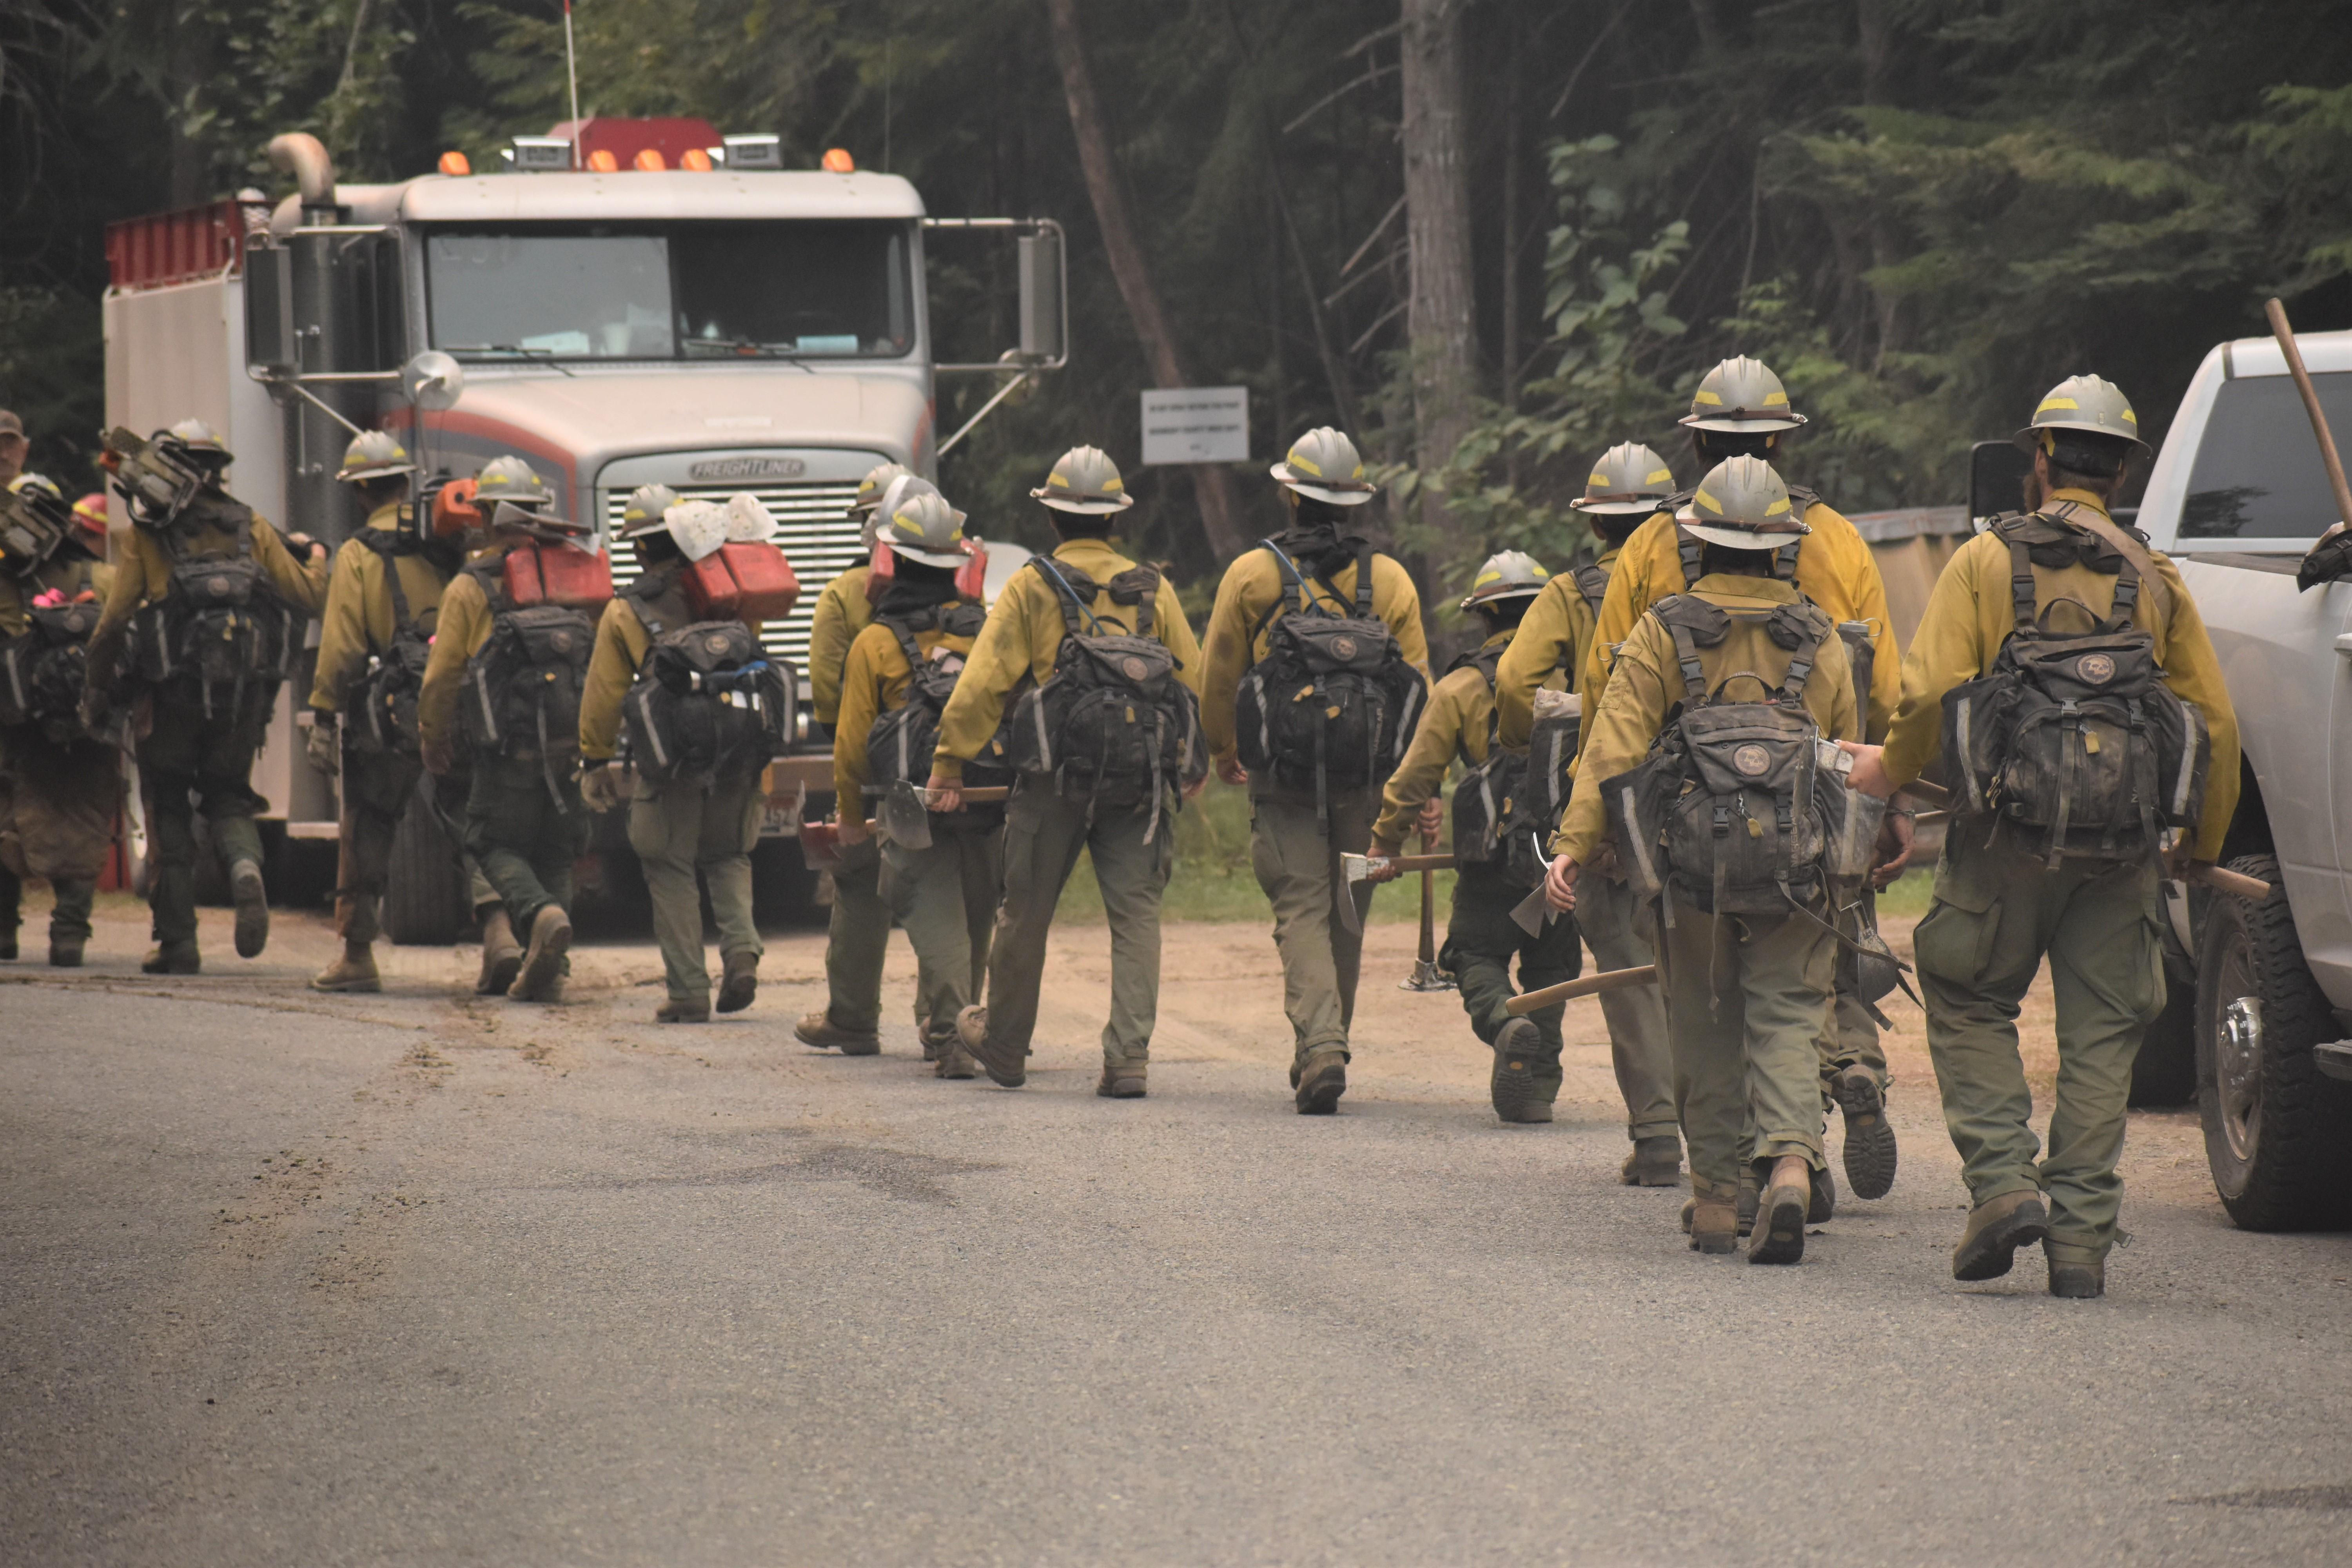 Firefighting crew hiking to fireline. Crew is hiking in line with their fire packs and tools past a water tender.